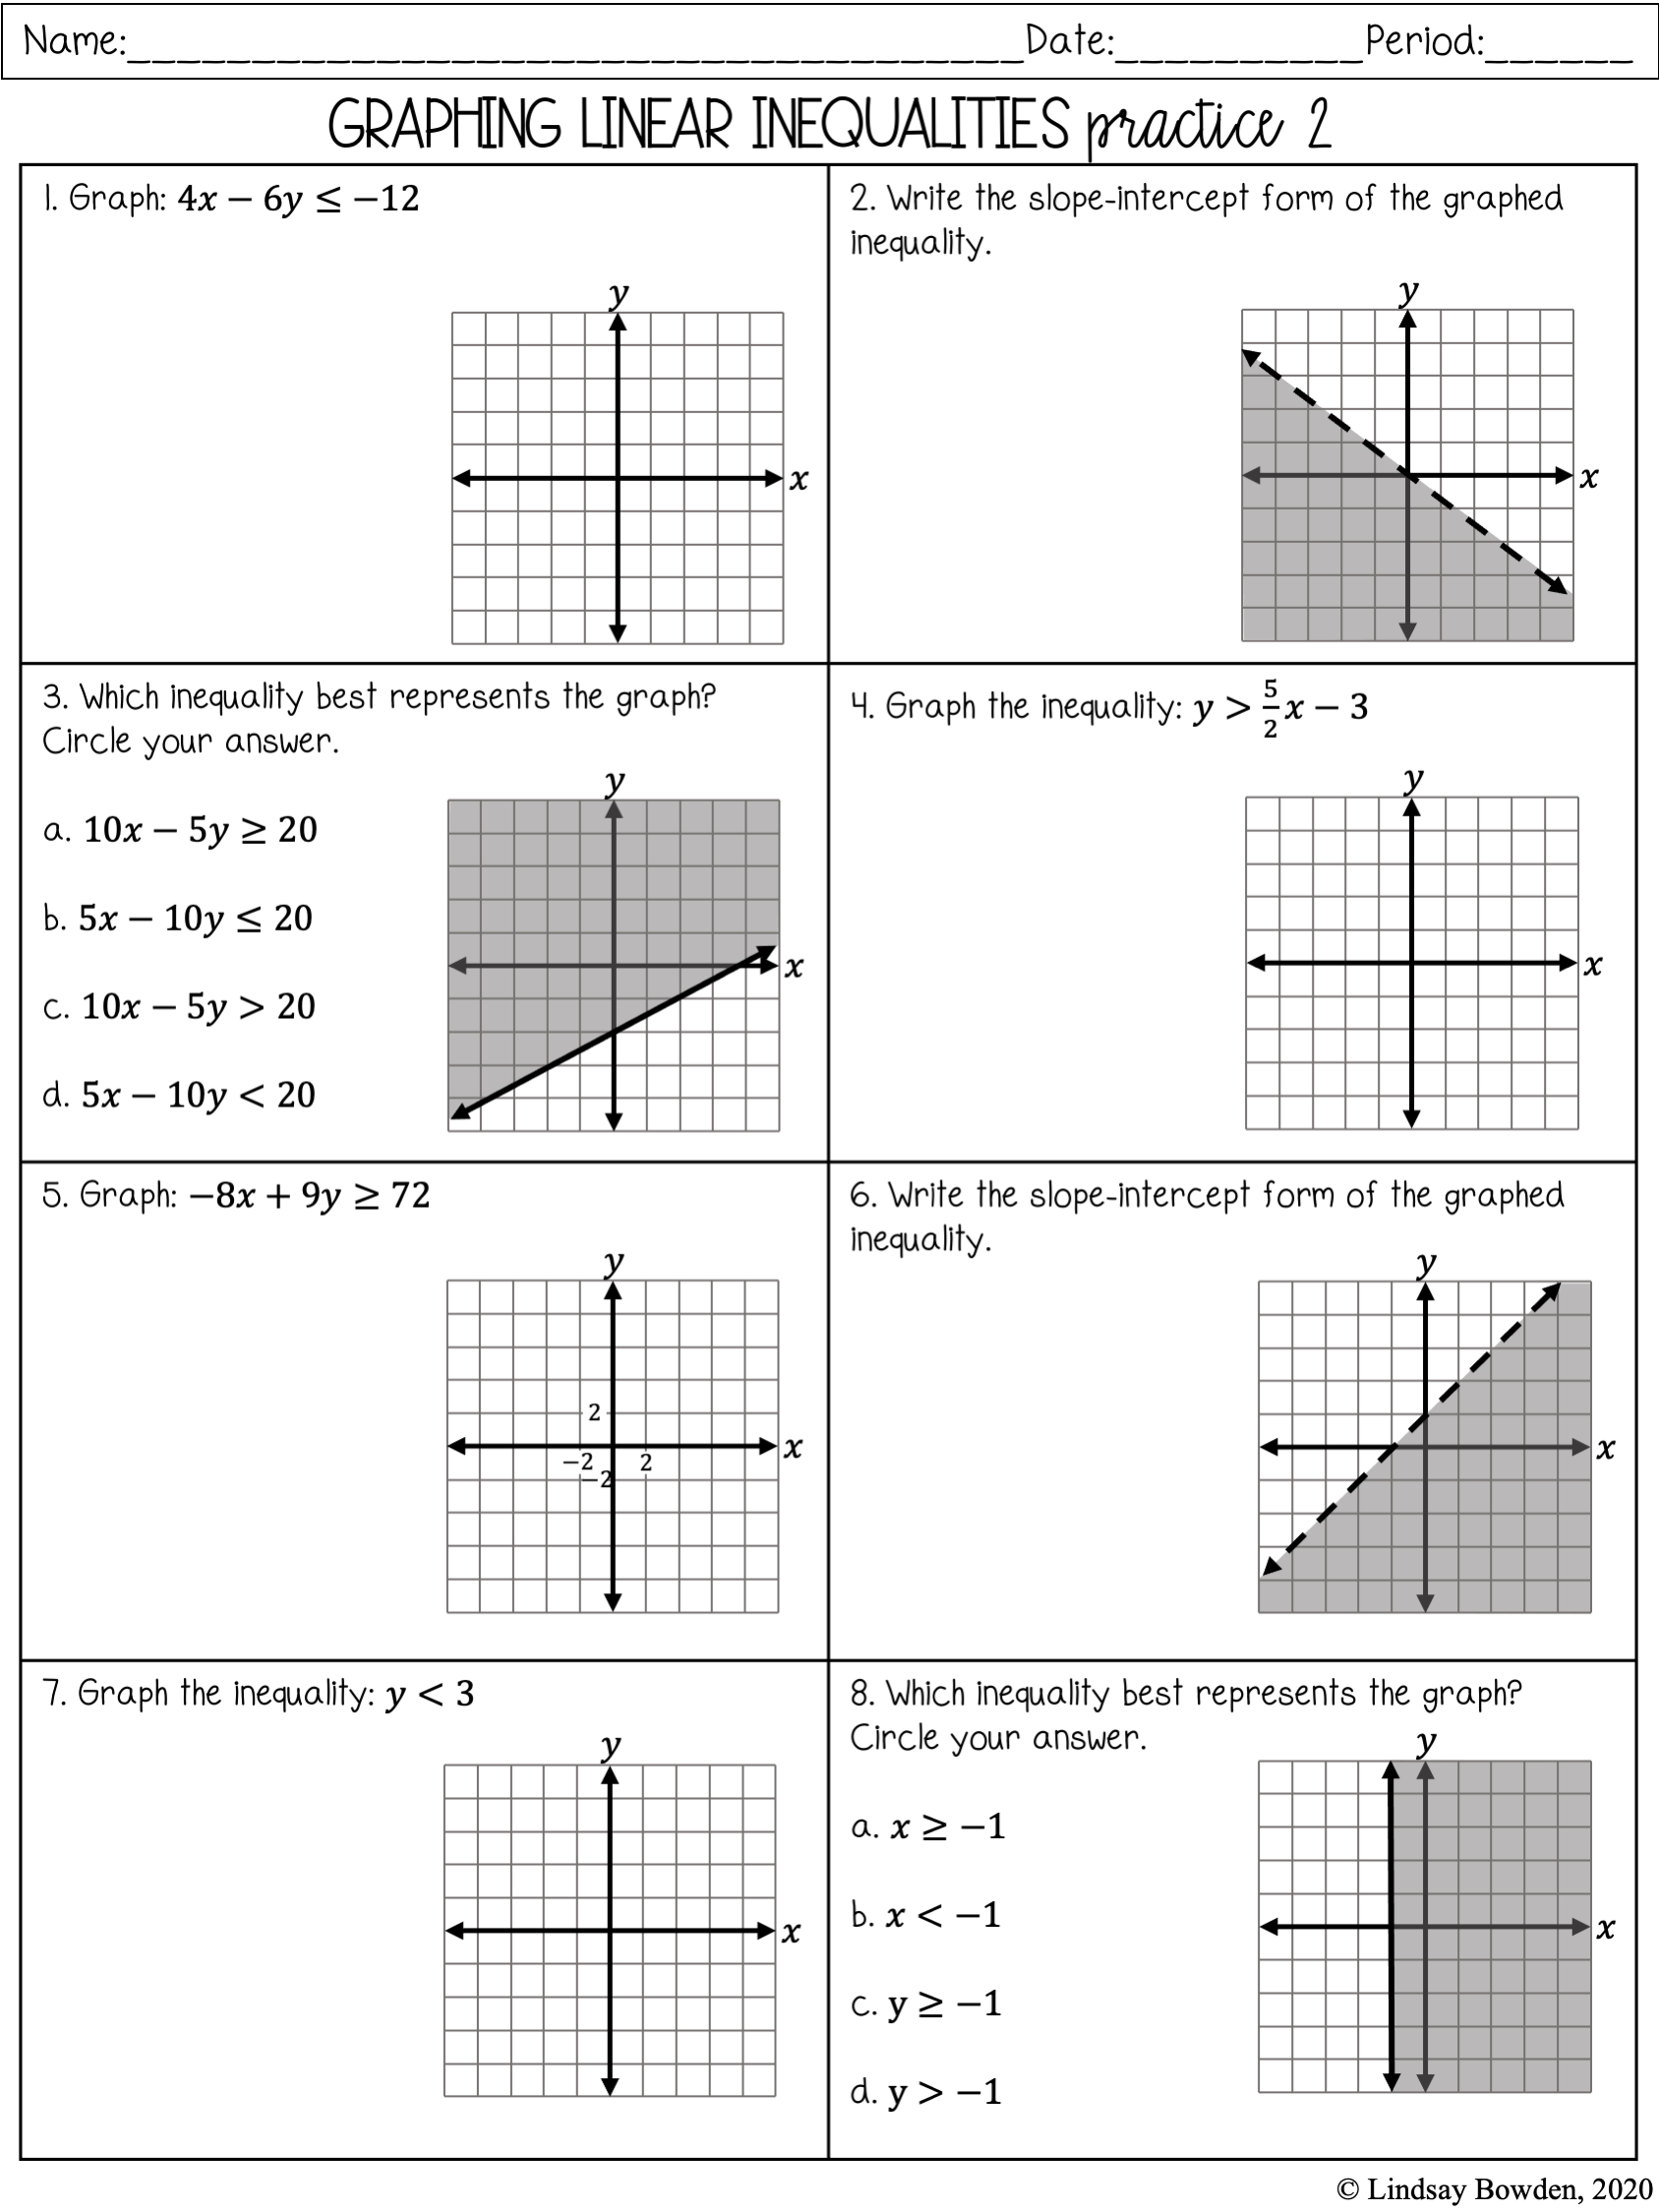 Linear Inequalities Notes and Worksheets - Lindsay Bowden For Graphing Slope Intercept Form Worksheet